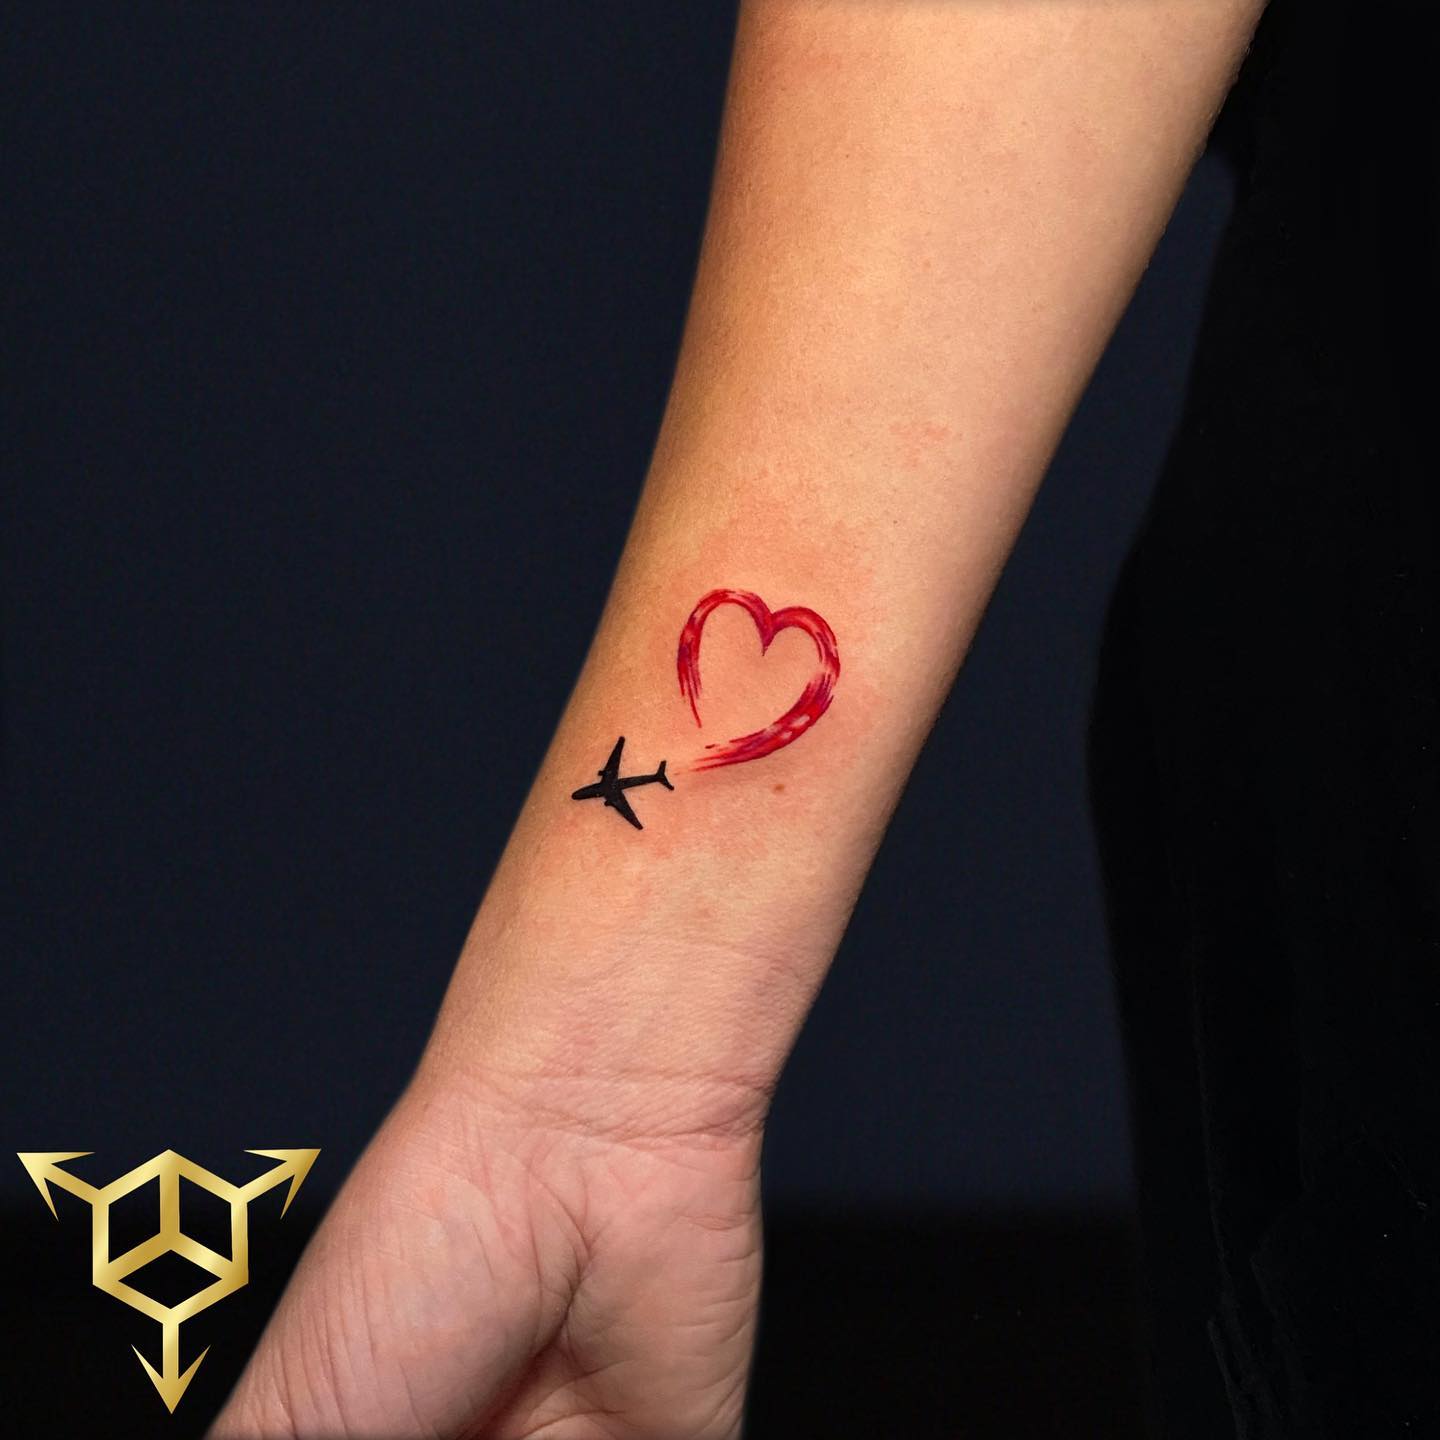 Things You Need To Know Before Getting An Airplane Tattoo